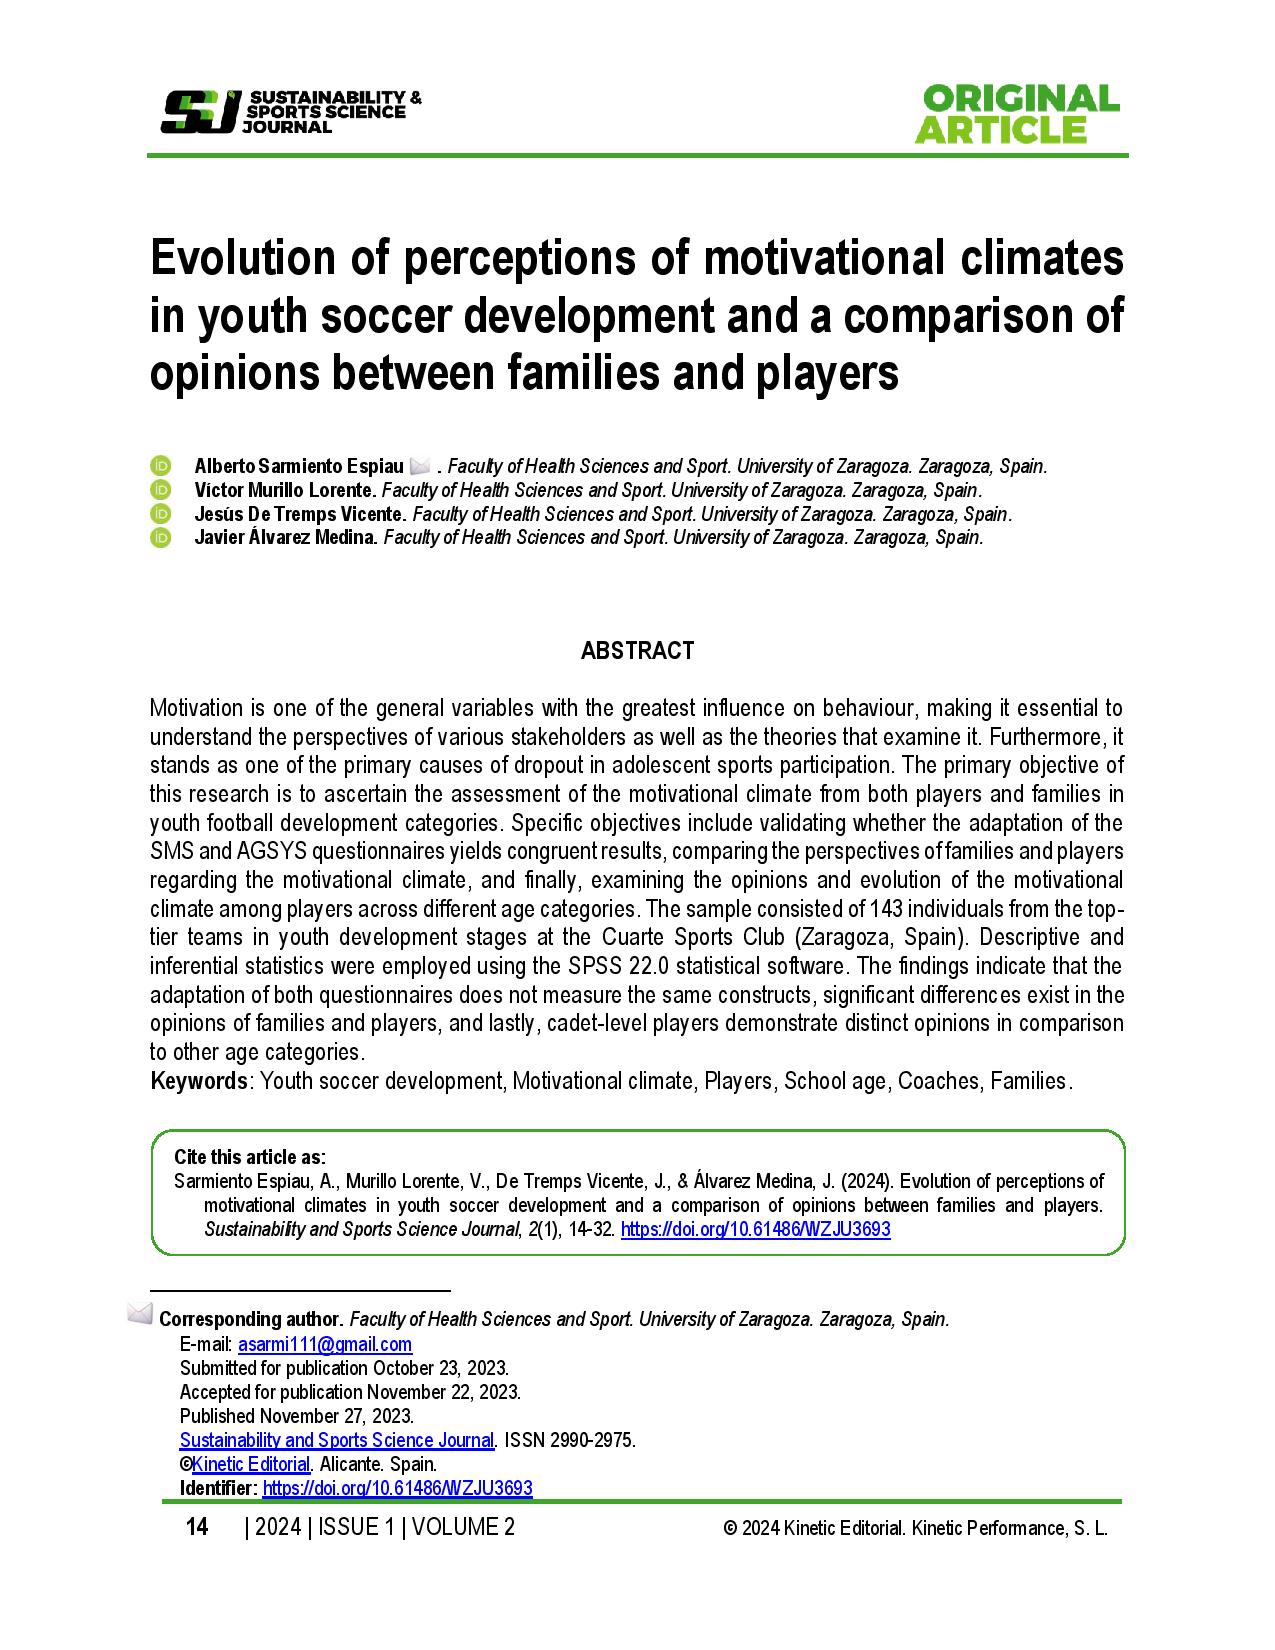 Evolution of perceptions of motivational climates in youth soccer development and a comparison of opinions between families and players